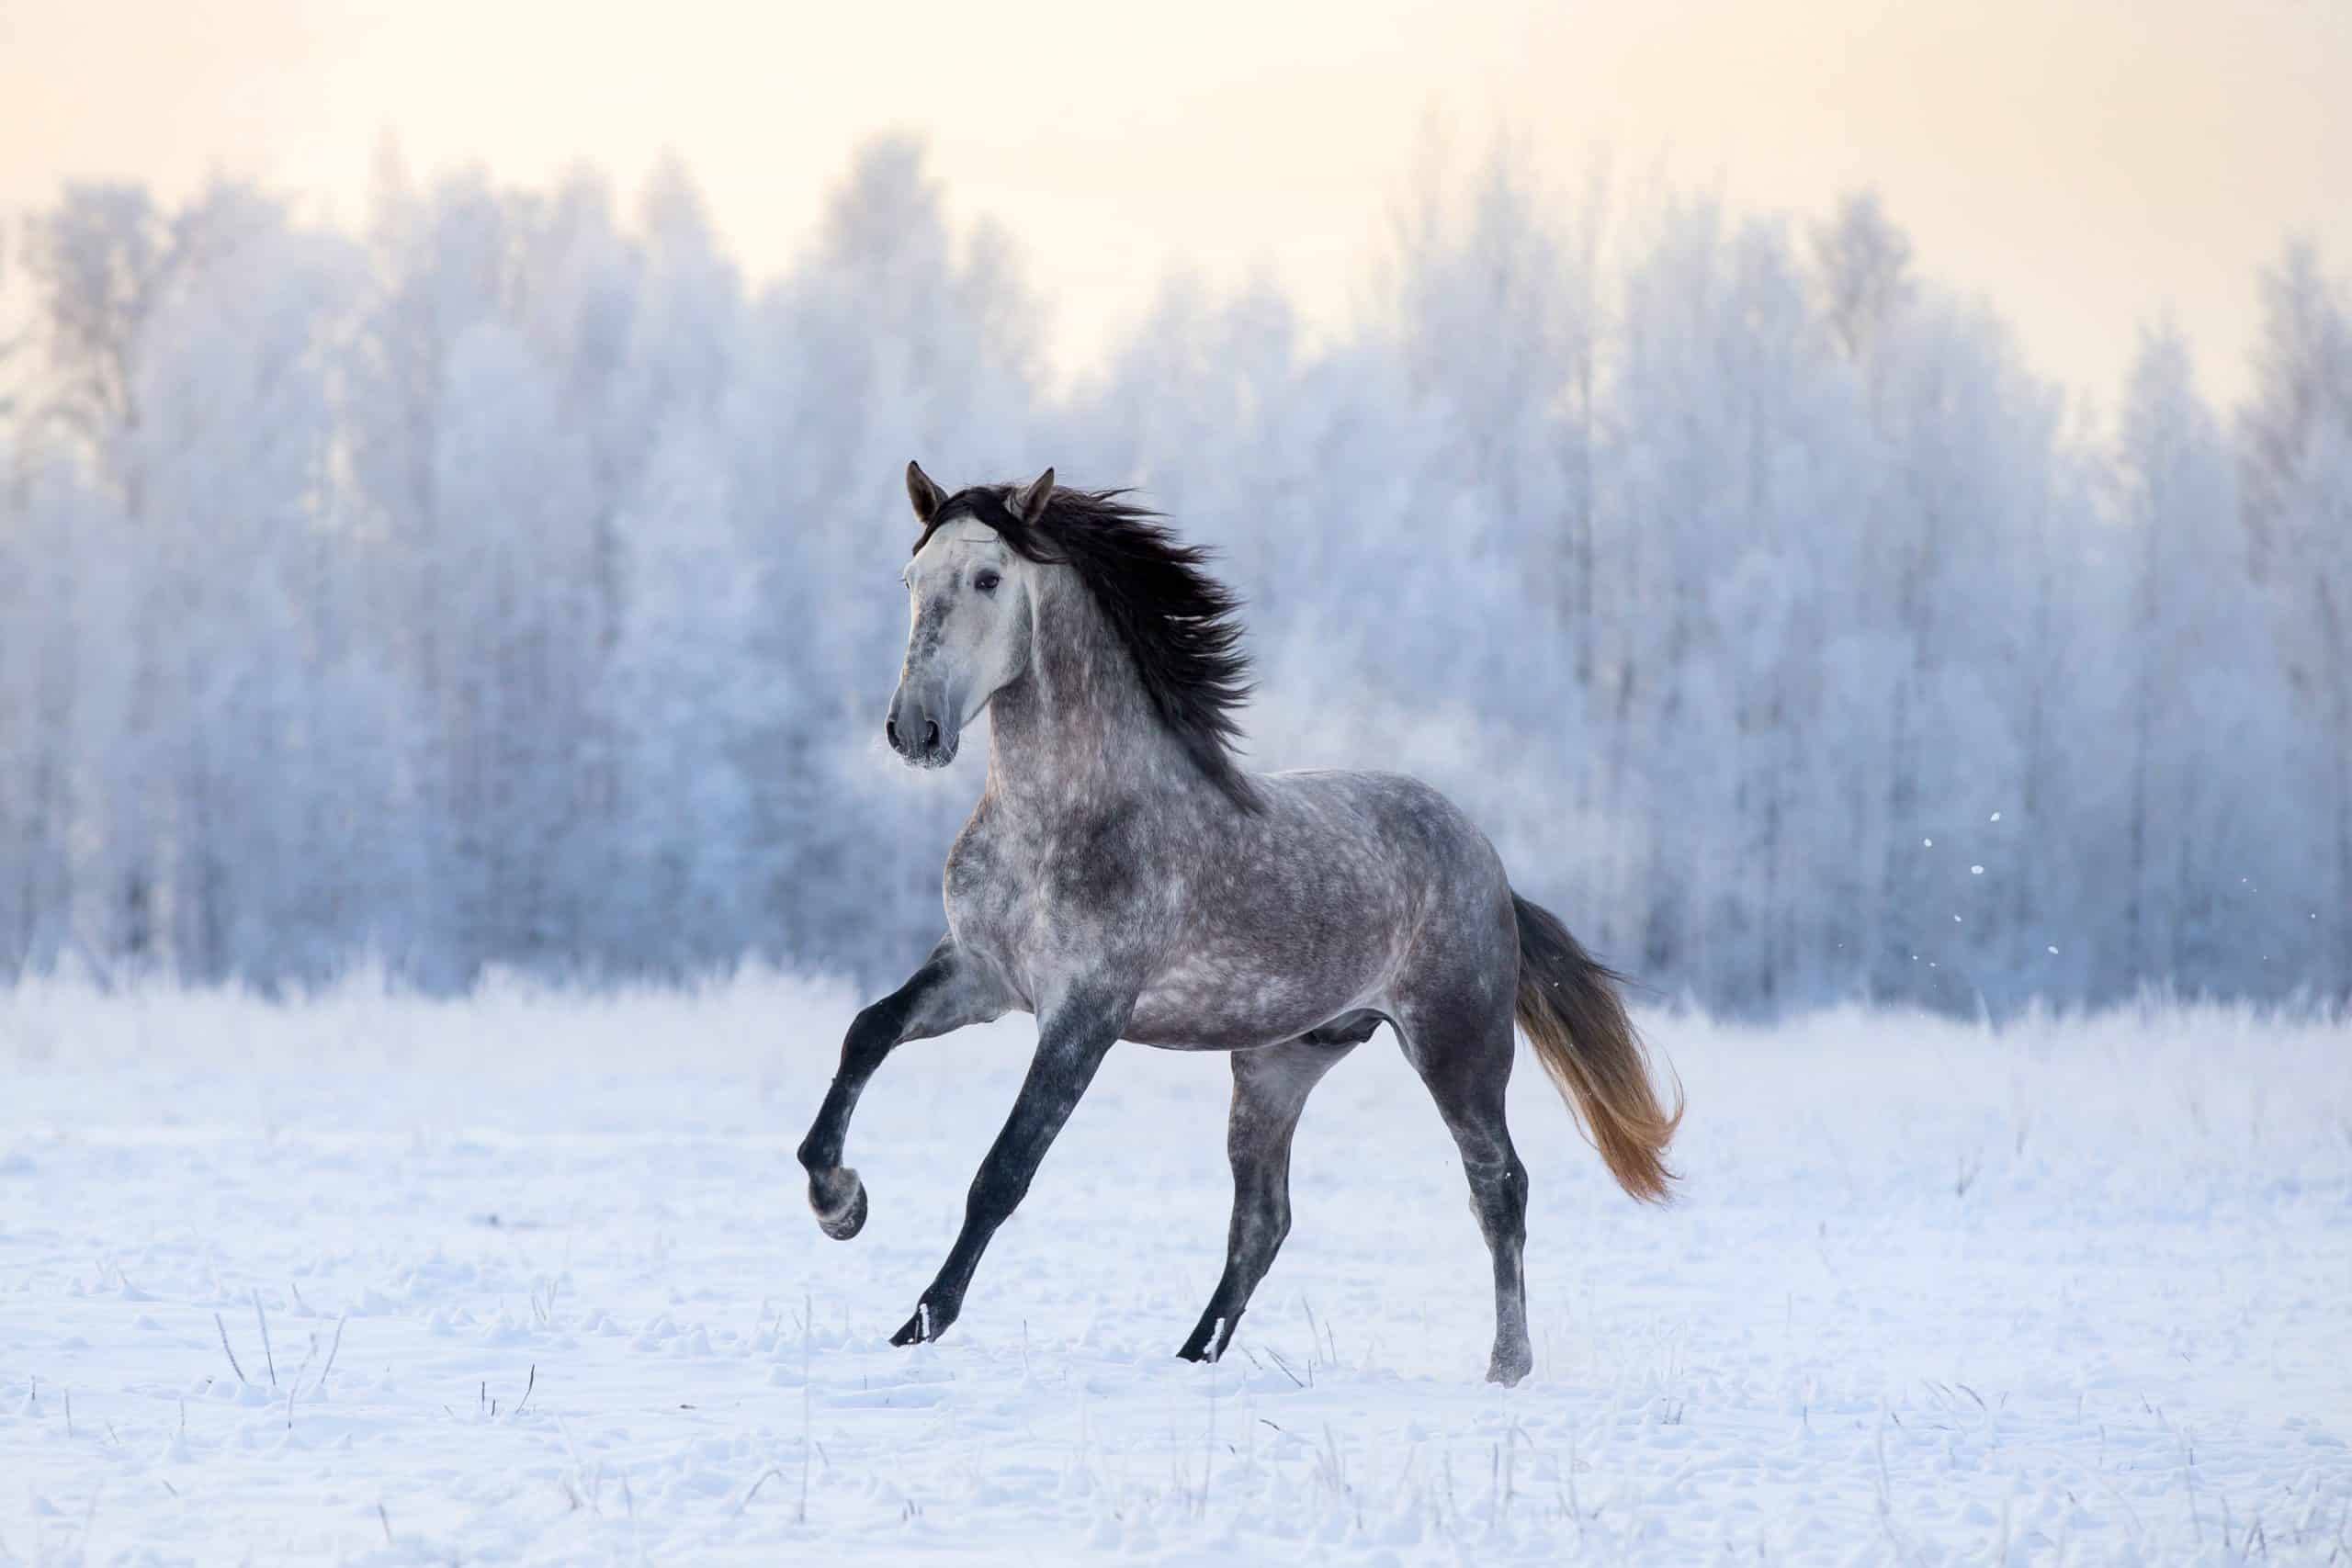 Andalusian horse on winter background